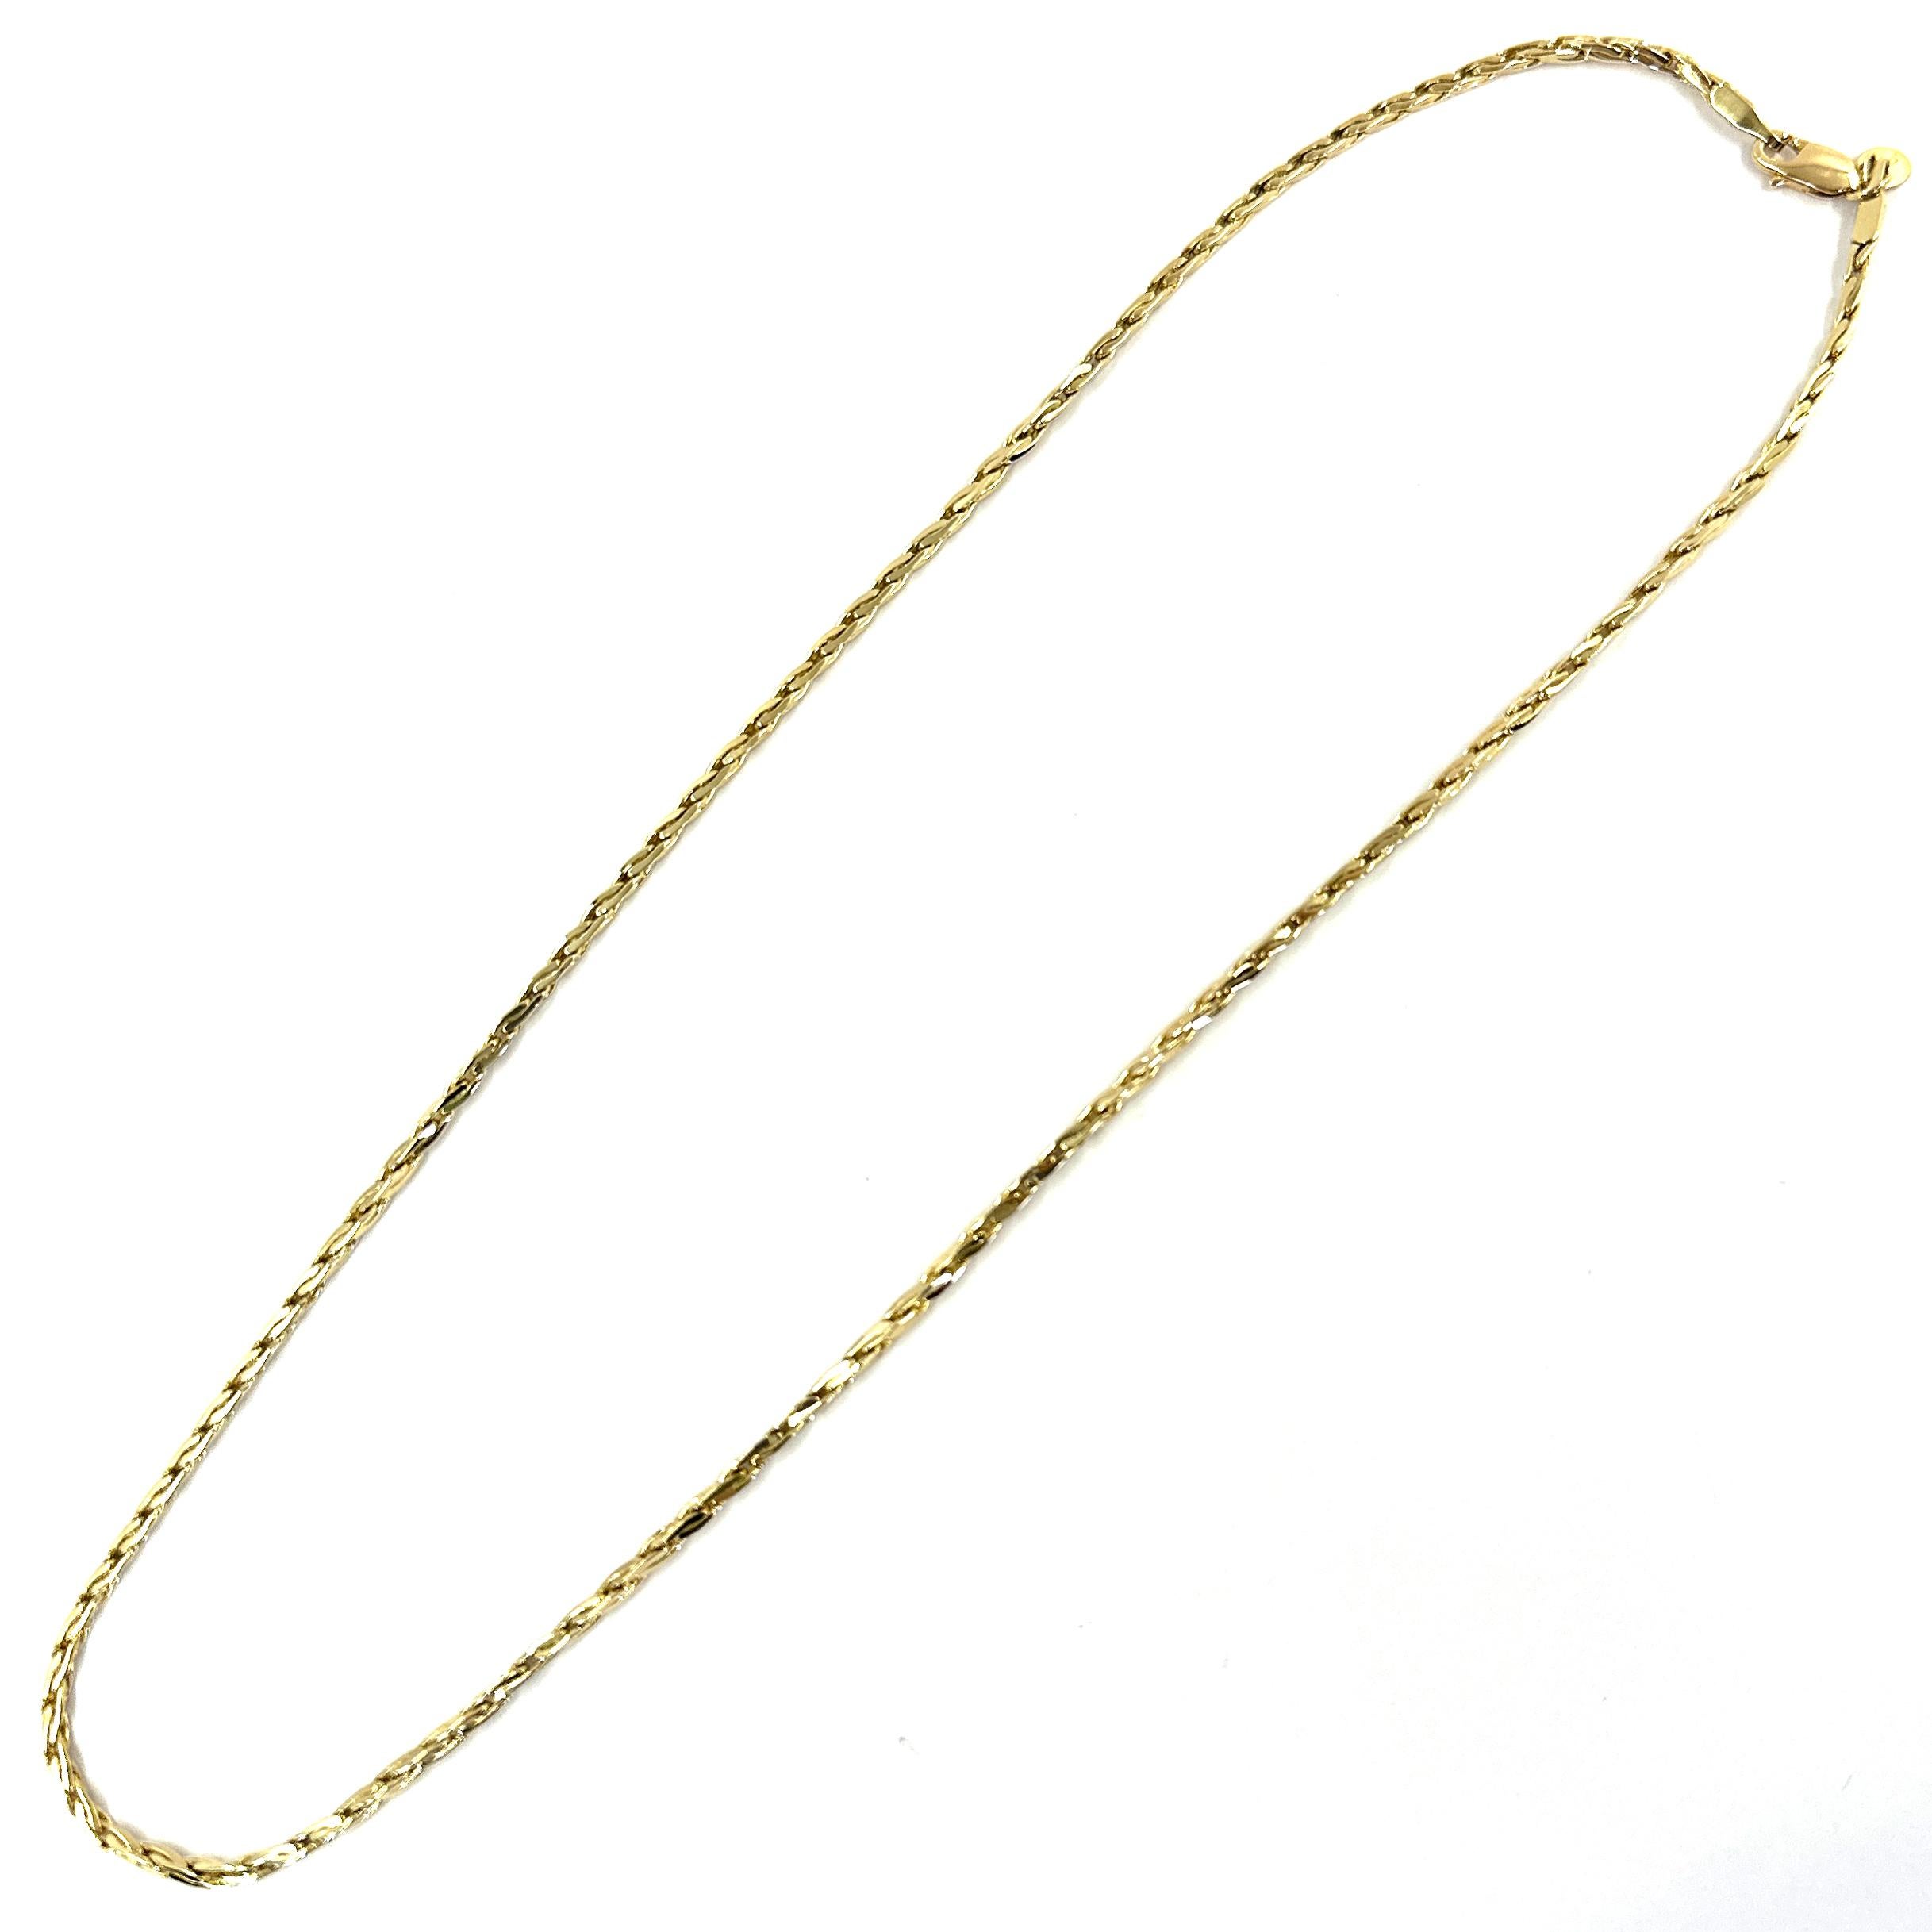 Gucci 18 Karat Yellow Gold Chain In Good Condition For Sale In Coral Gables, FL